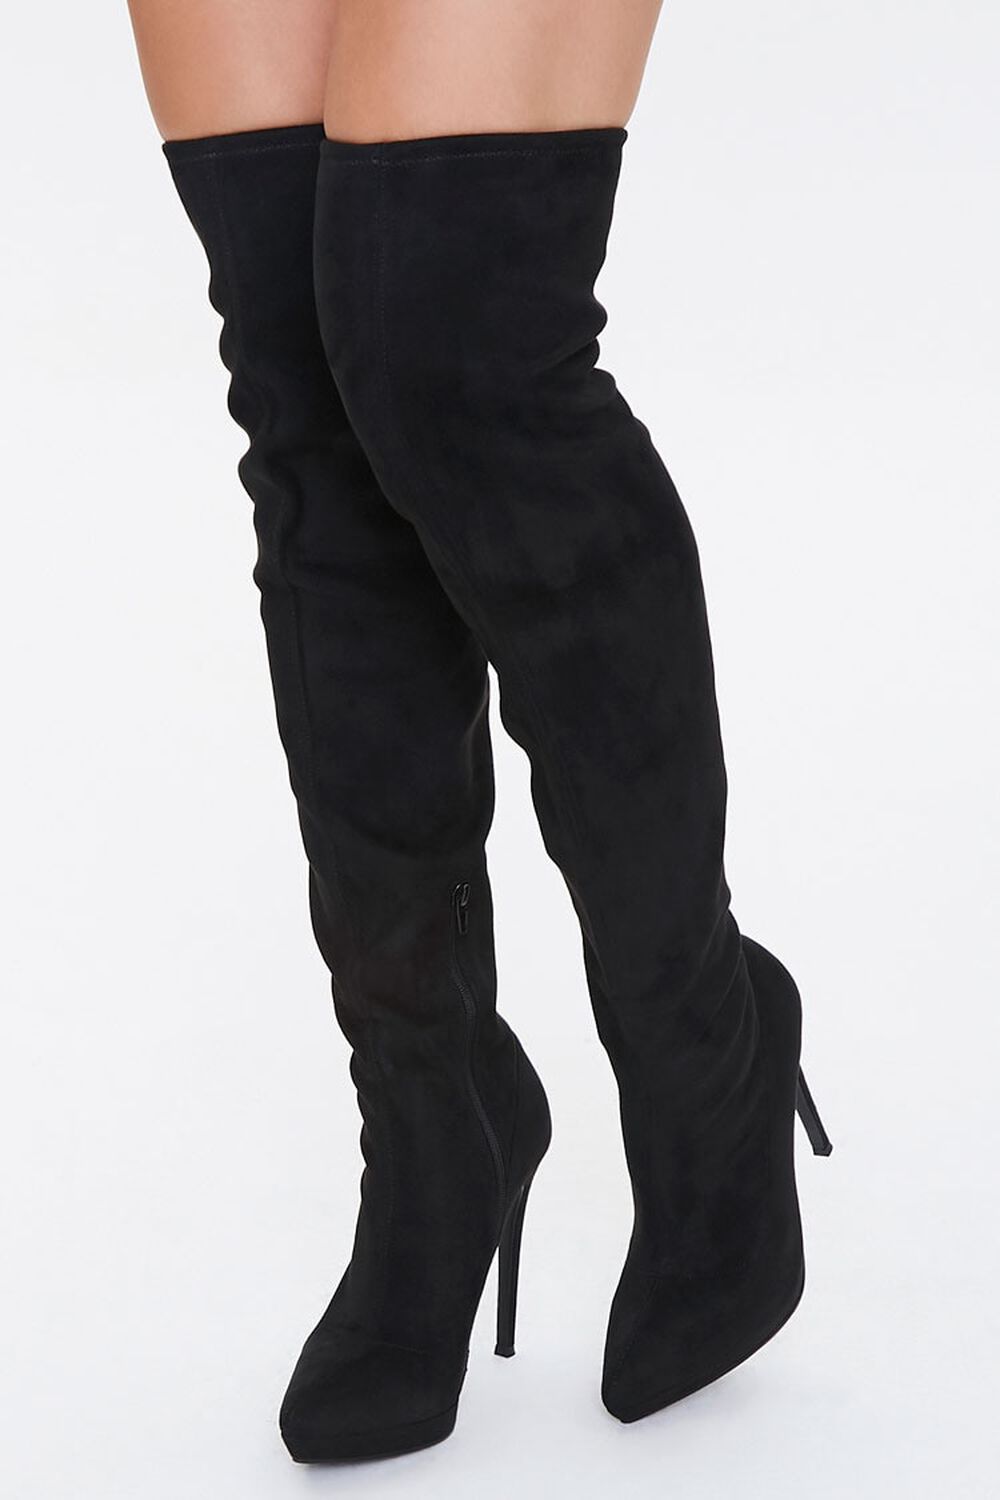 BLACK Over-the-Knee Stiletto Boots, image 1